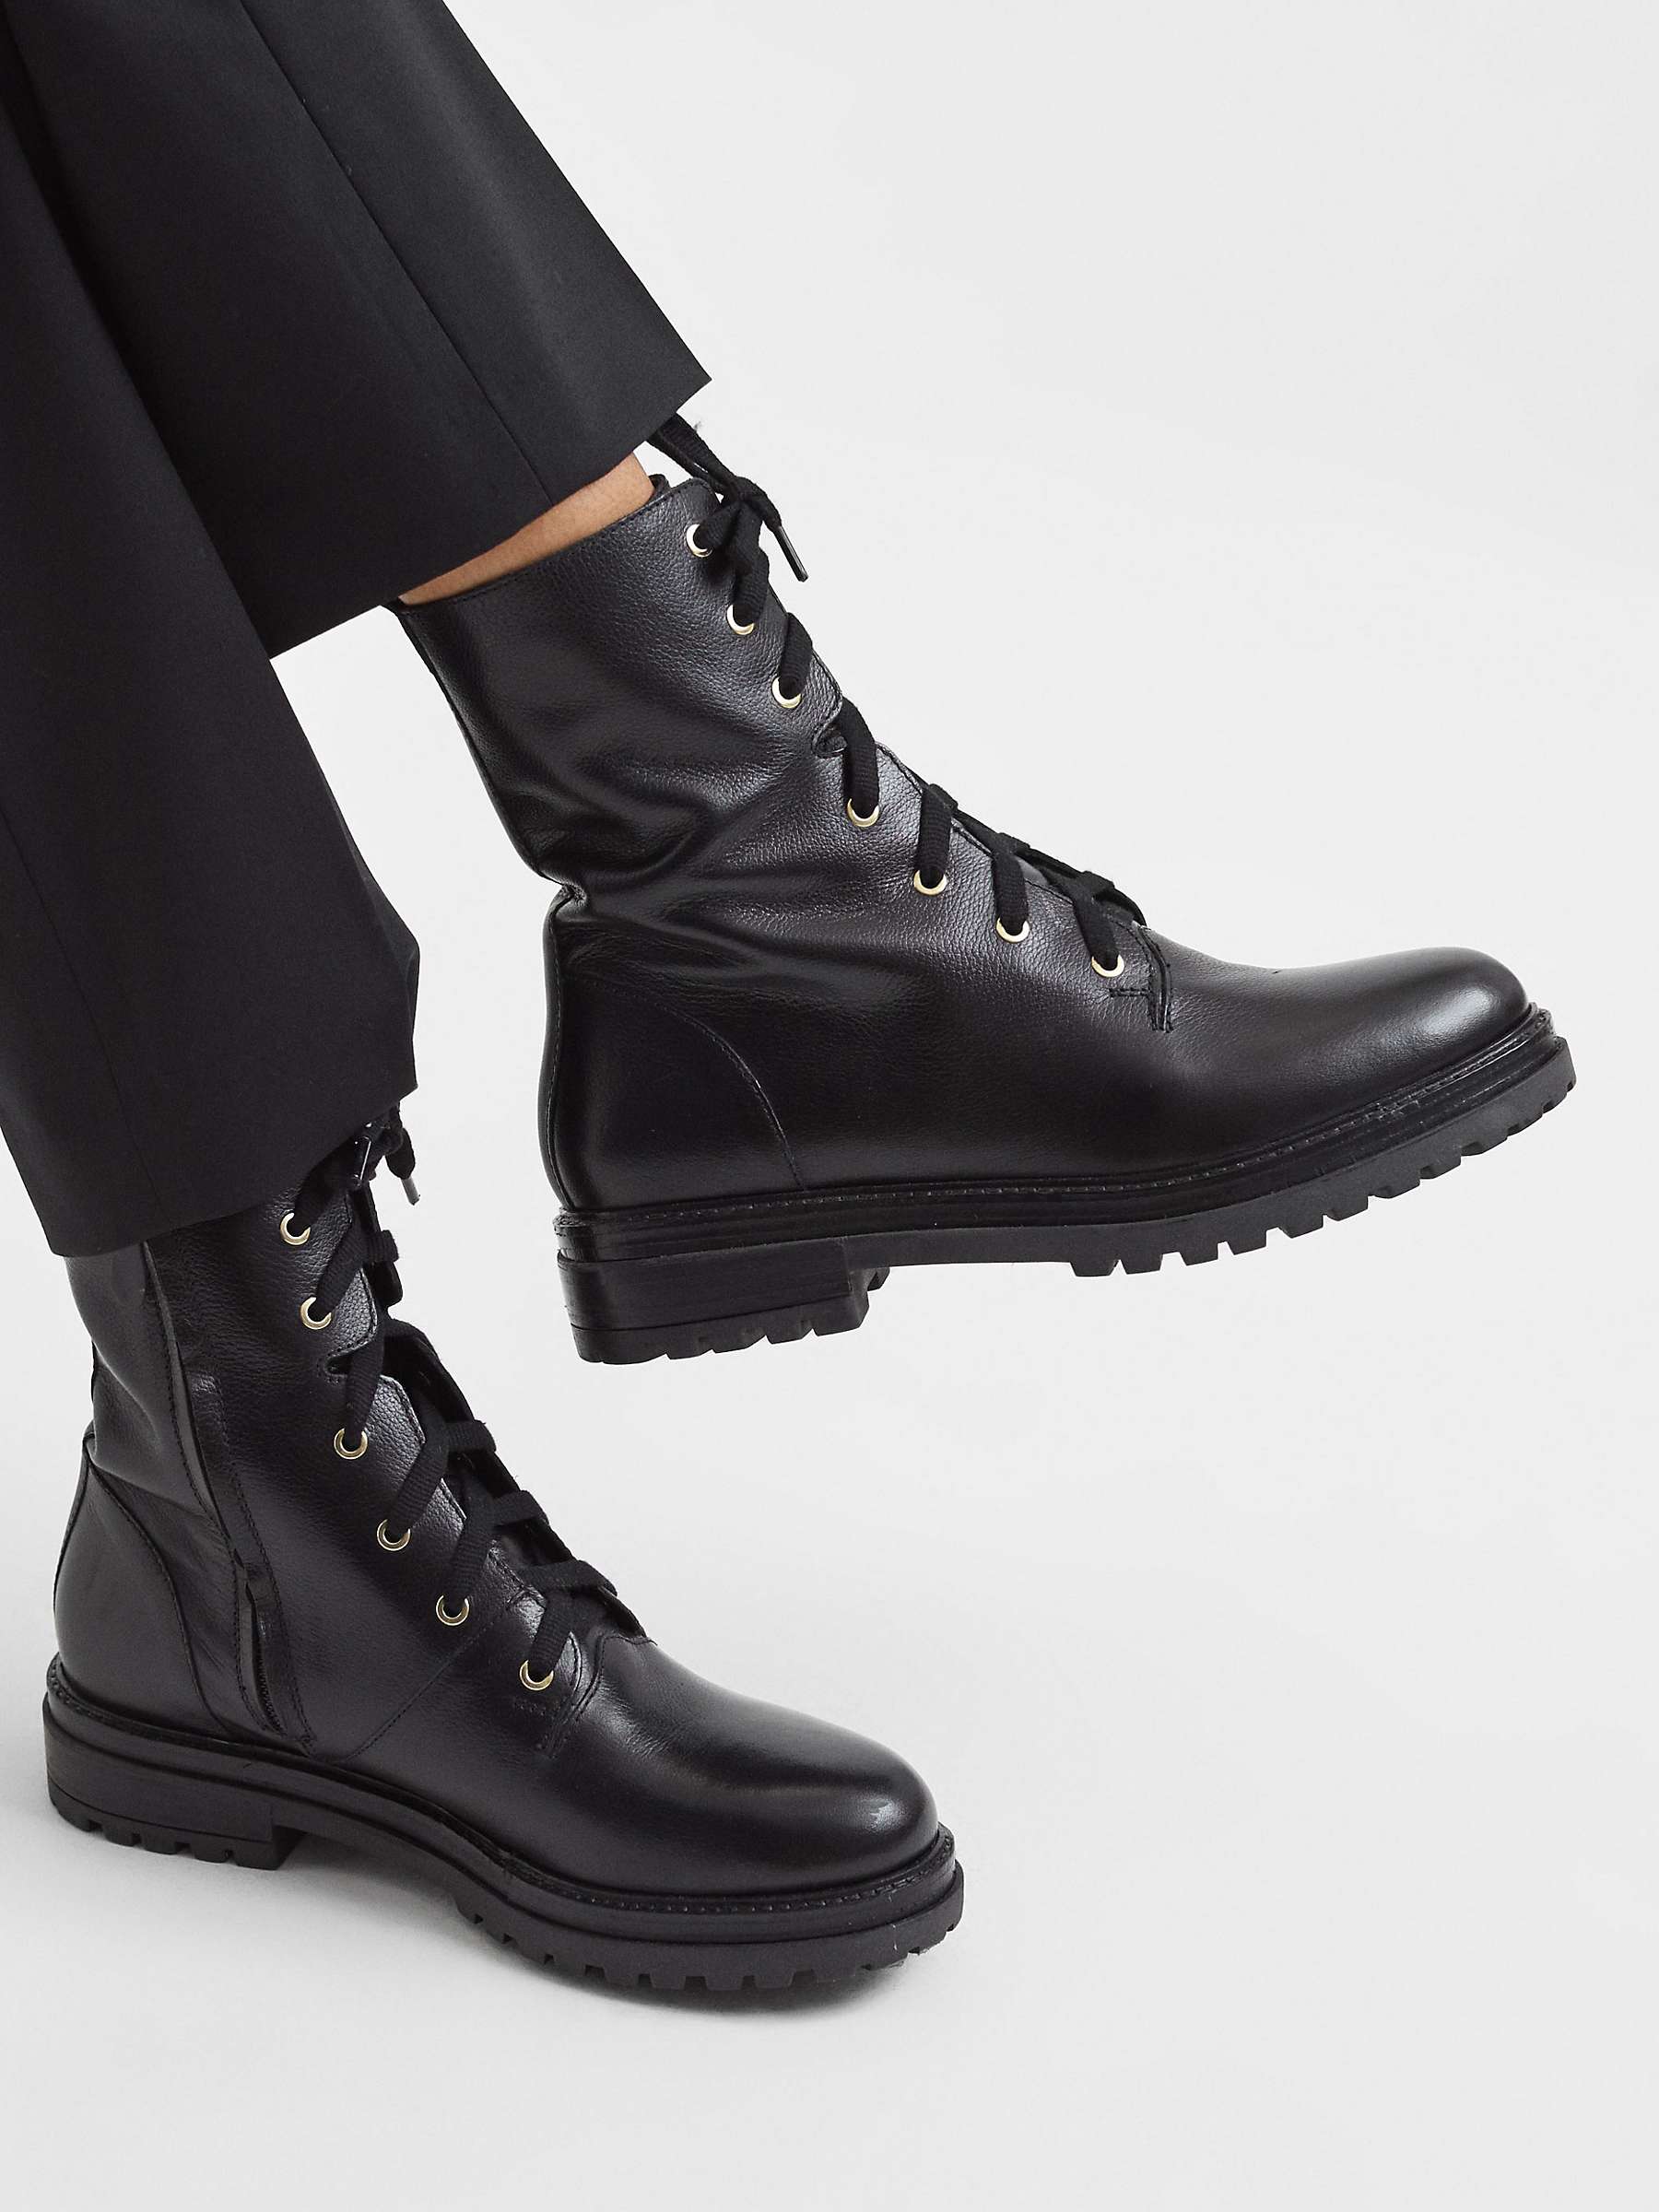 Buy Reiss Jenna Leather Lace Up Boots, Black Online at johnlewis.com